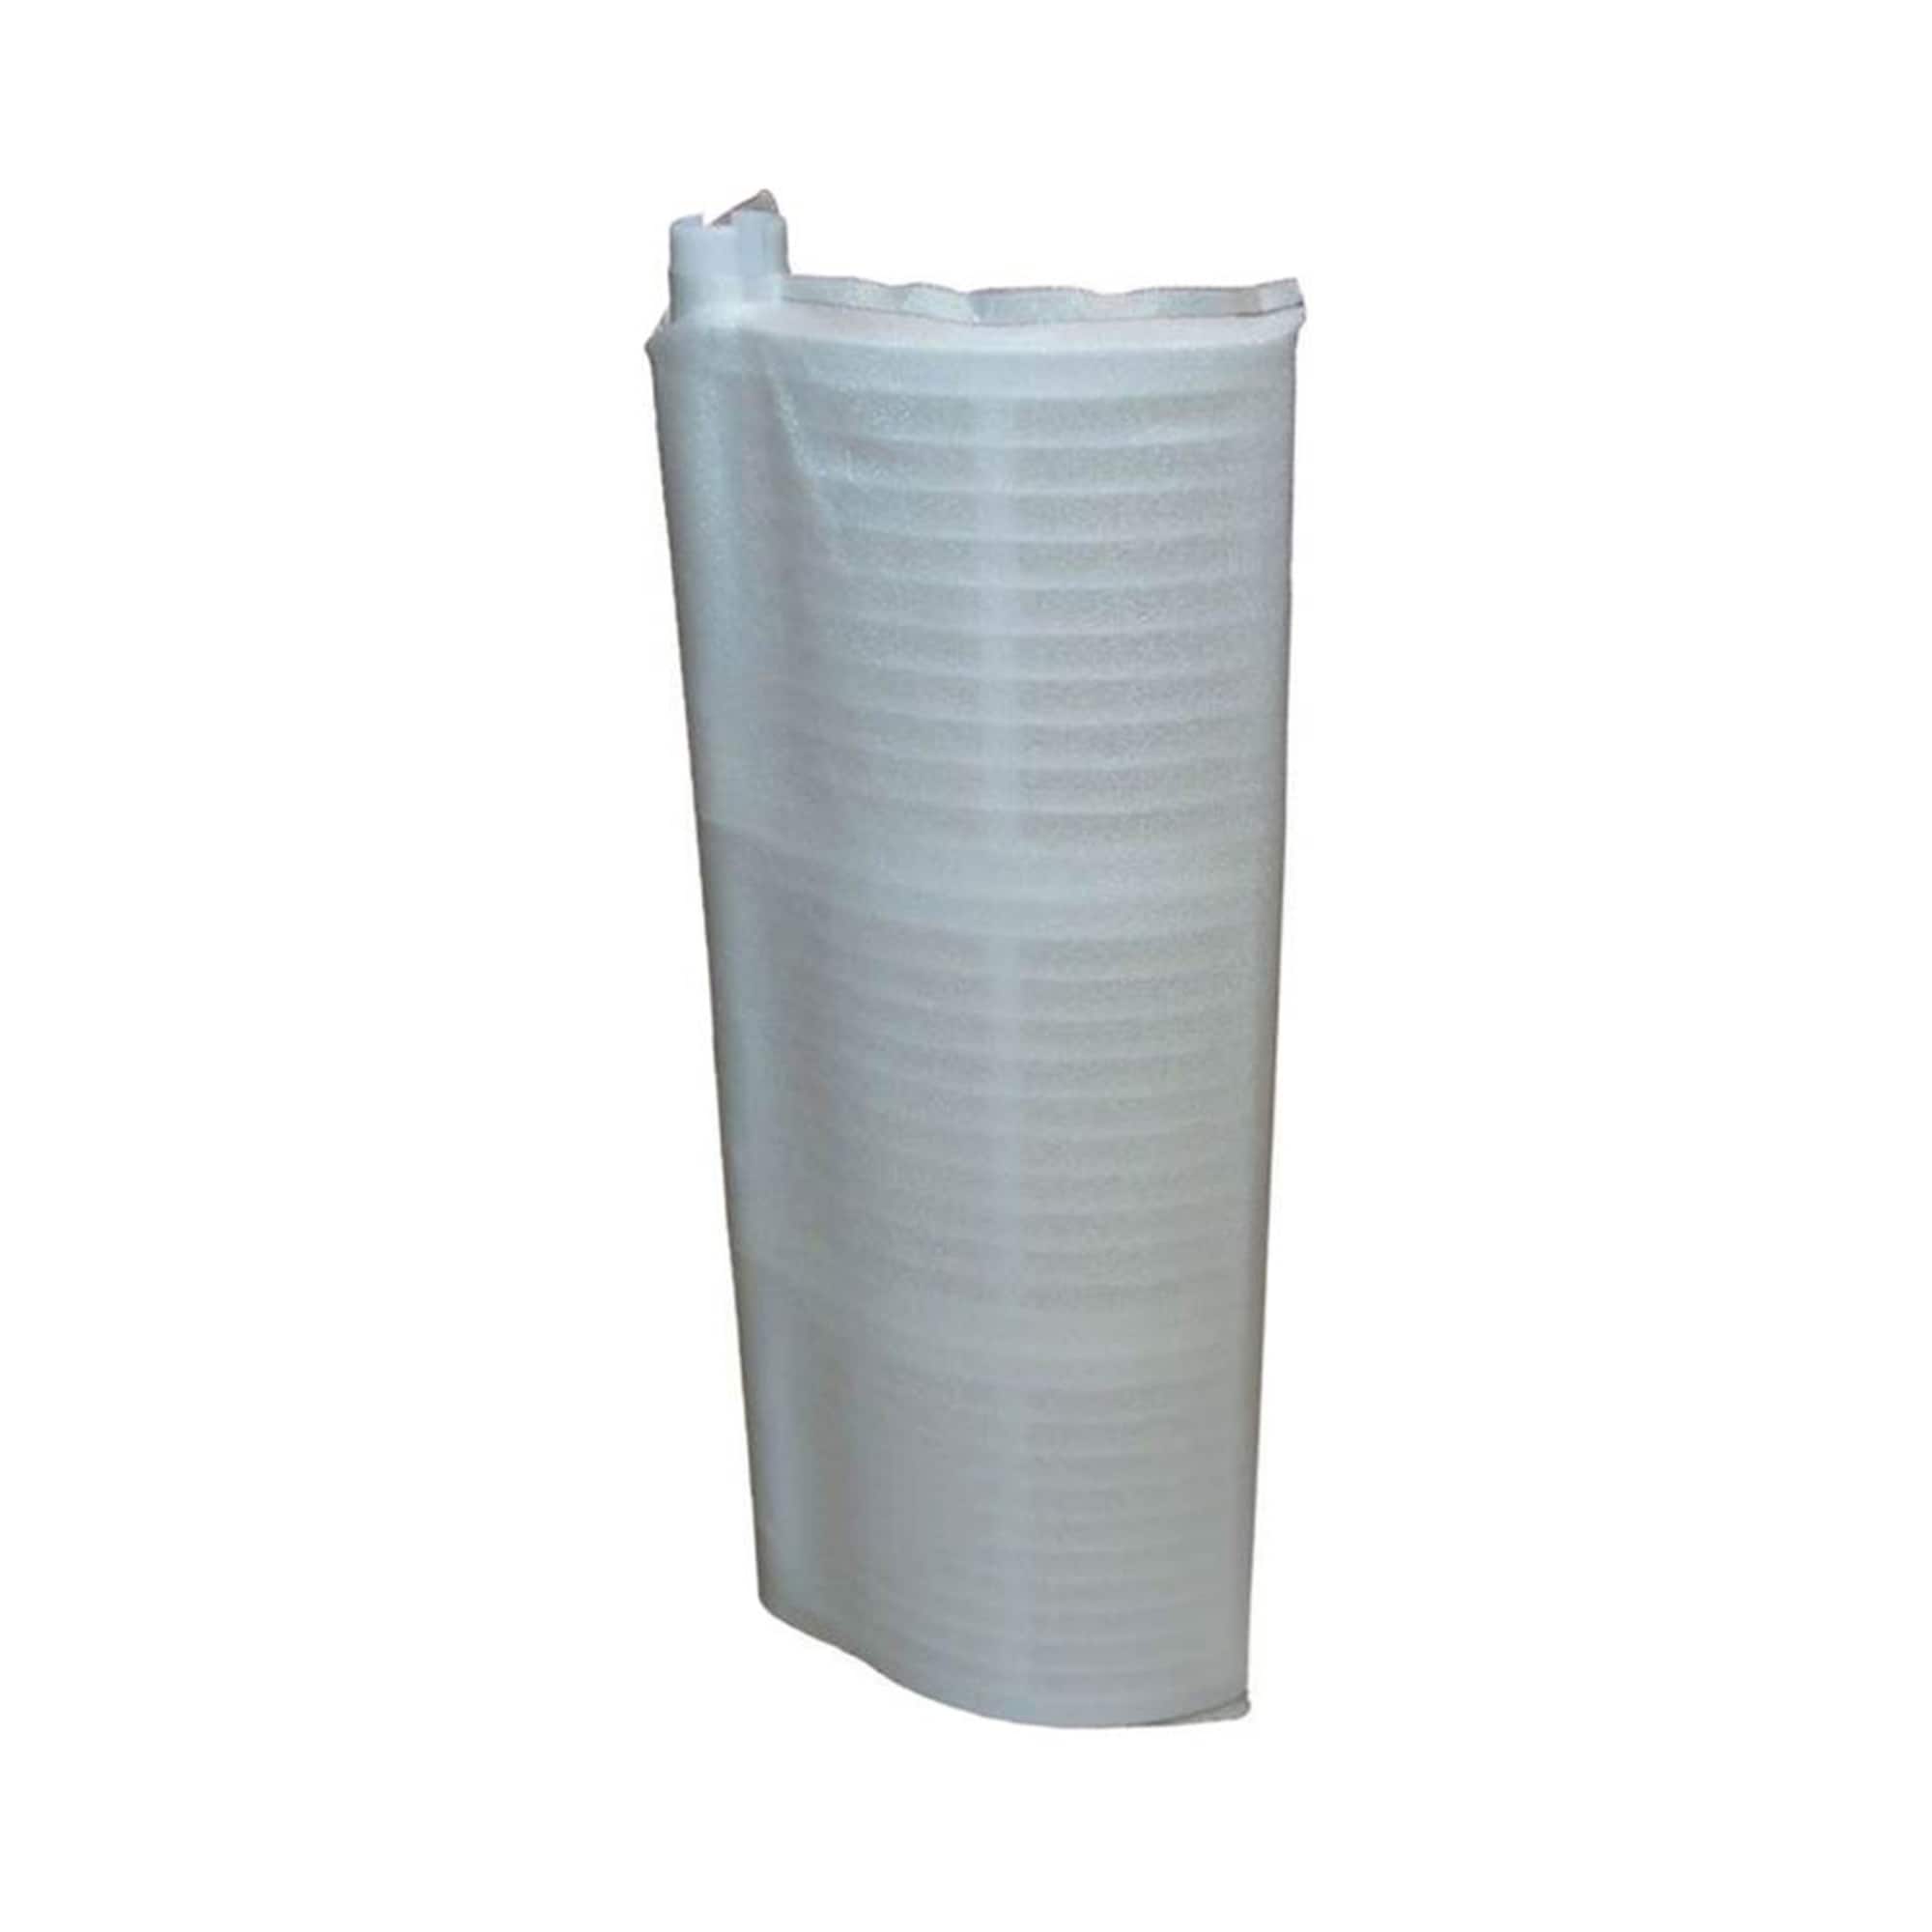 Unicel 18-in x 11-in dia 25-sq ft Pool Cartridge Filter at Lowes.com